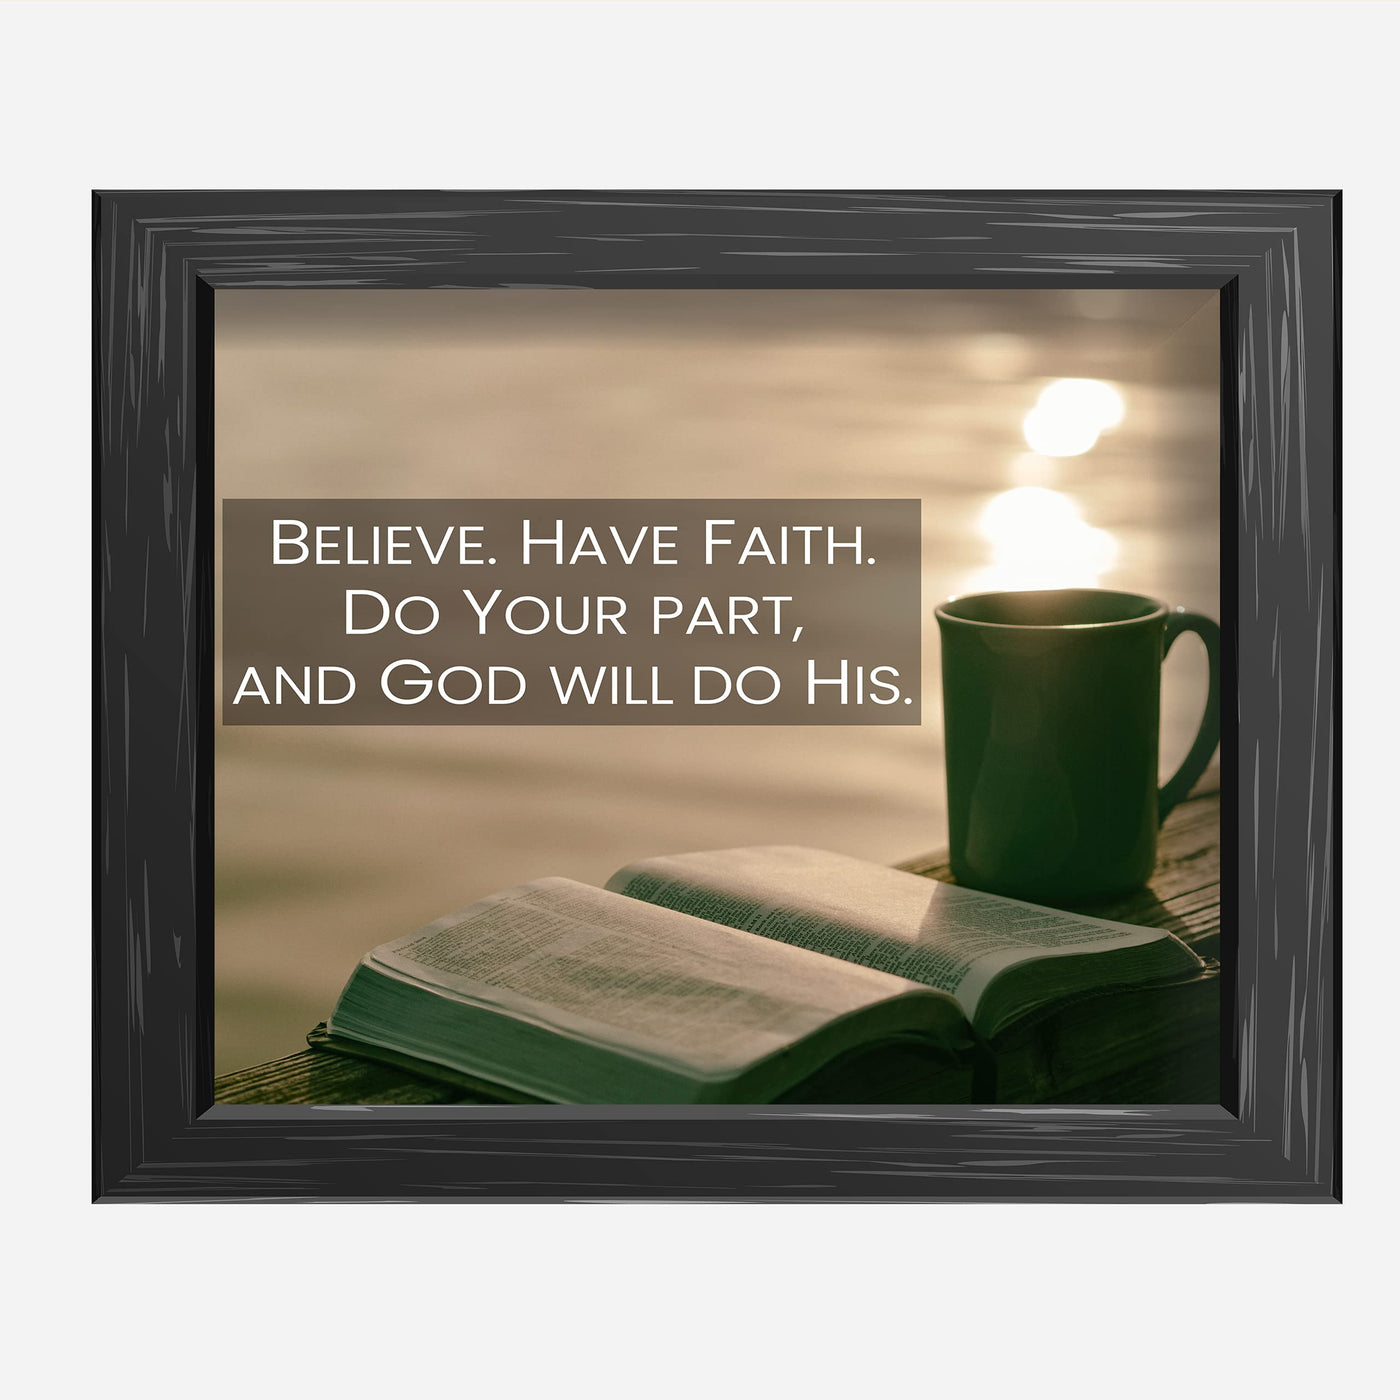 Believe-Have Faith-God Will Do His Part- Inspirational Christian Wall Art -10 x 8"- Bible Verse Photo Print w/Coffee Mug Image-Ready to Frame. Home-Office-Church Decor. Great Religious Gift!